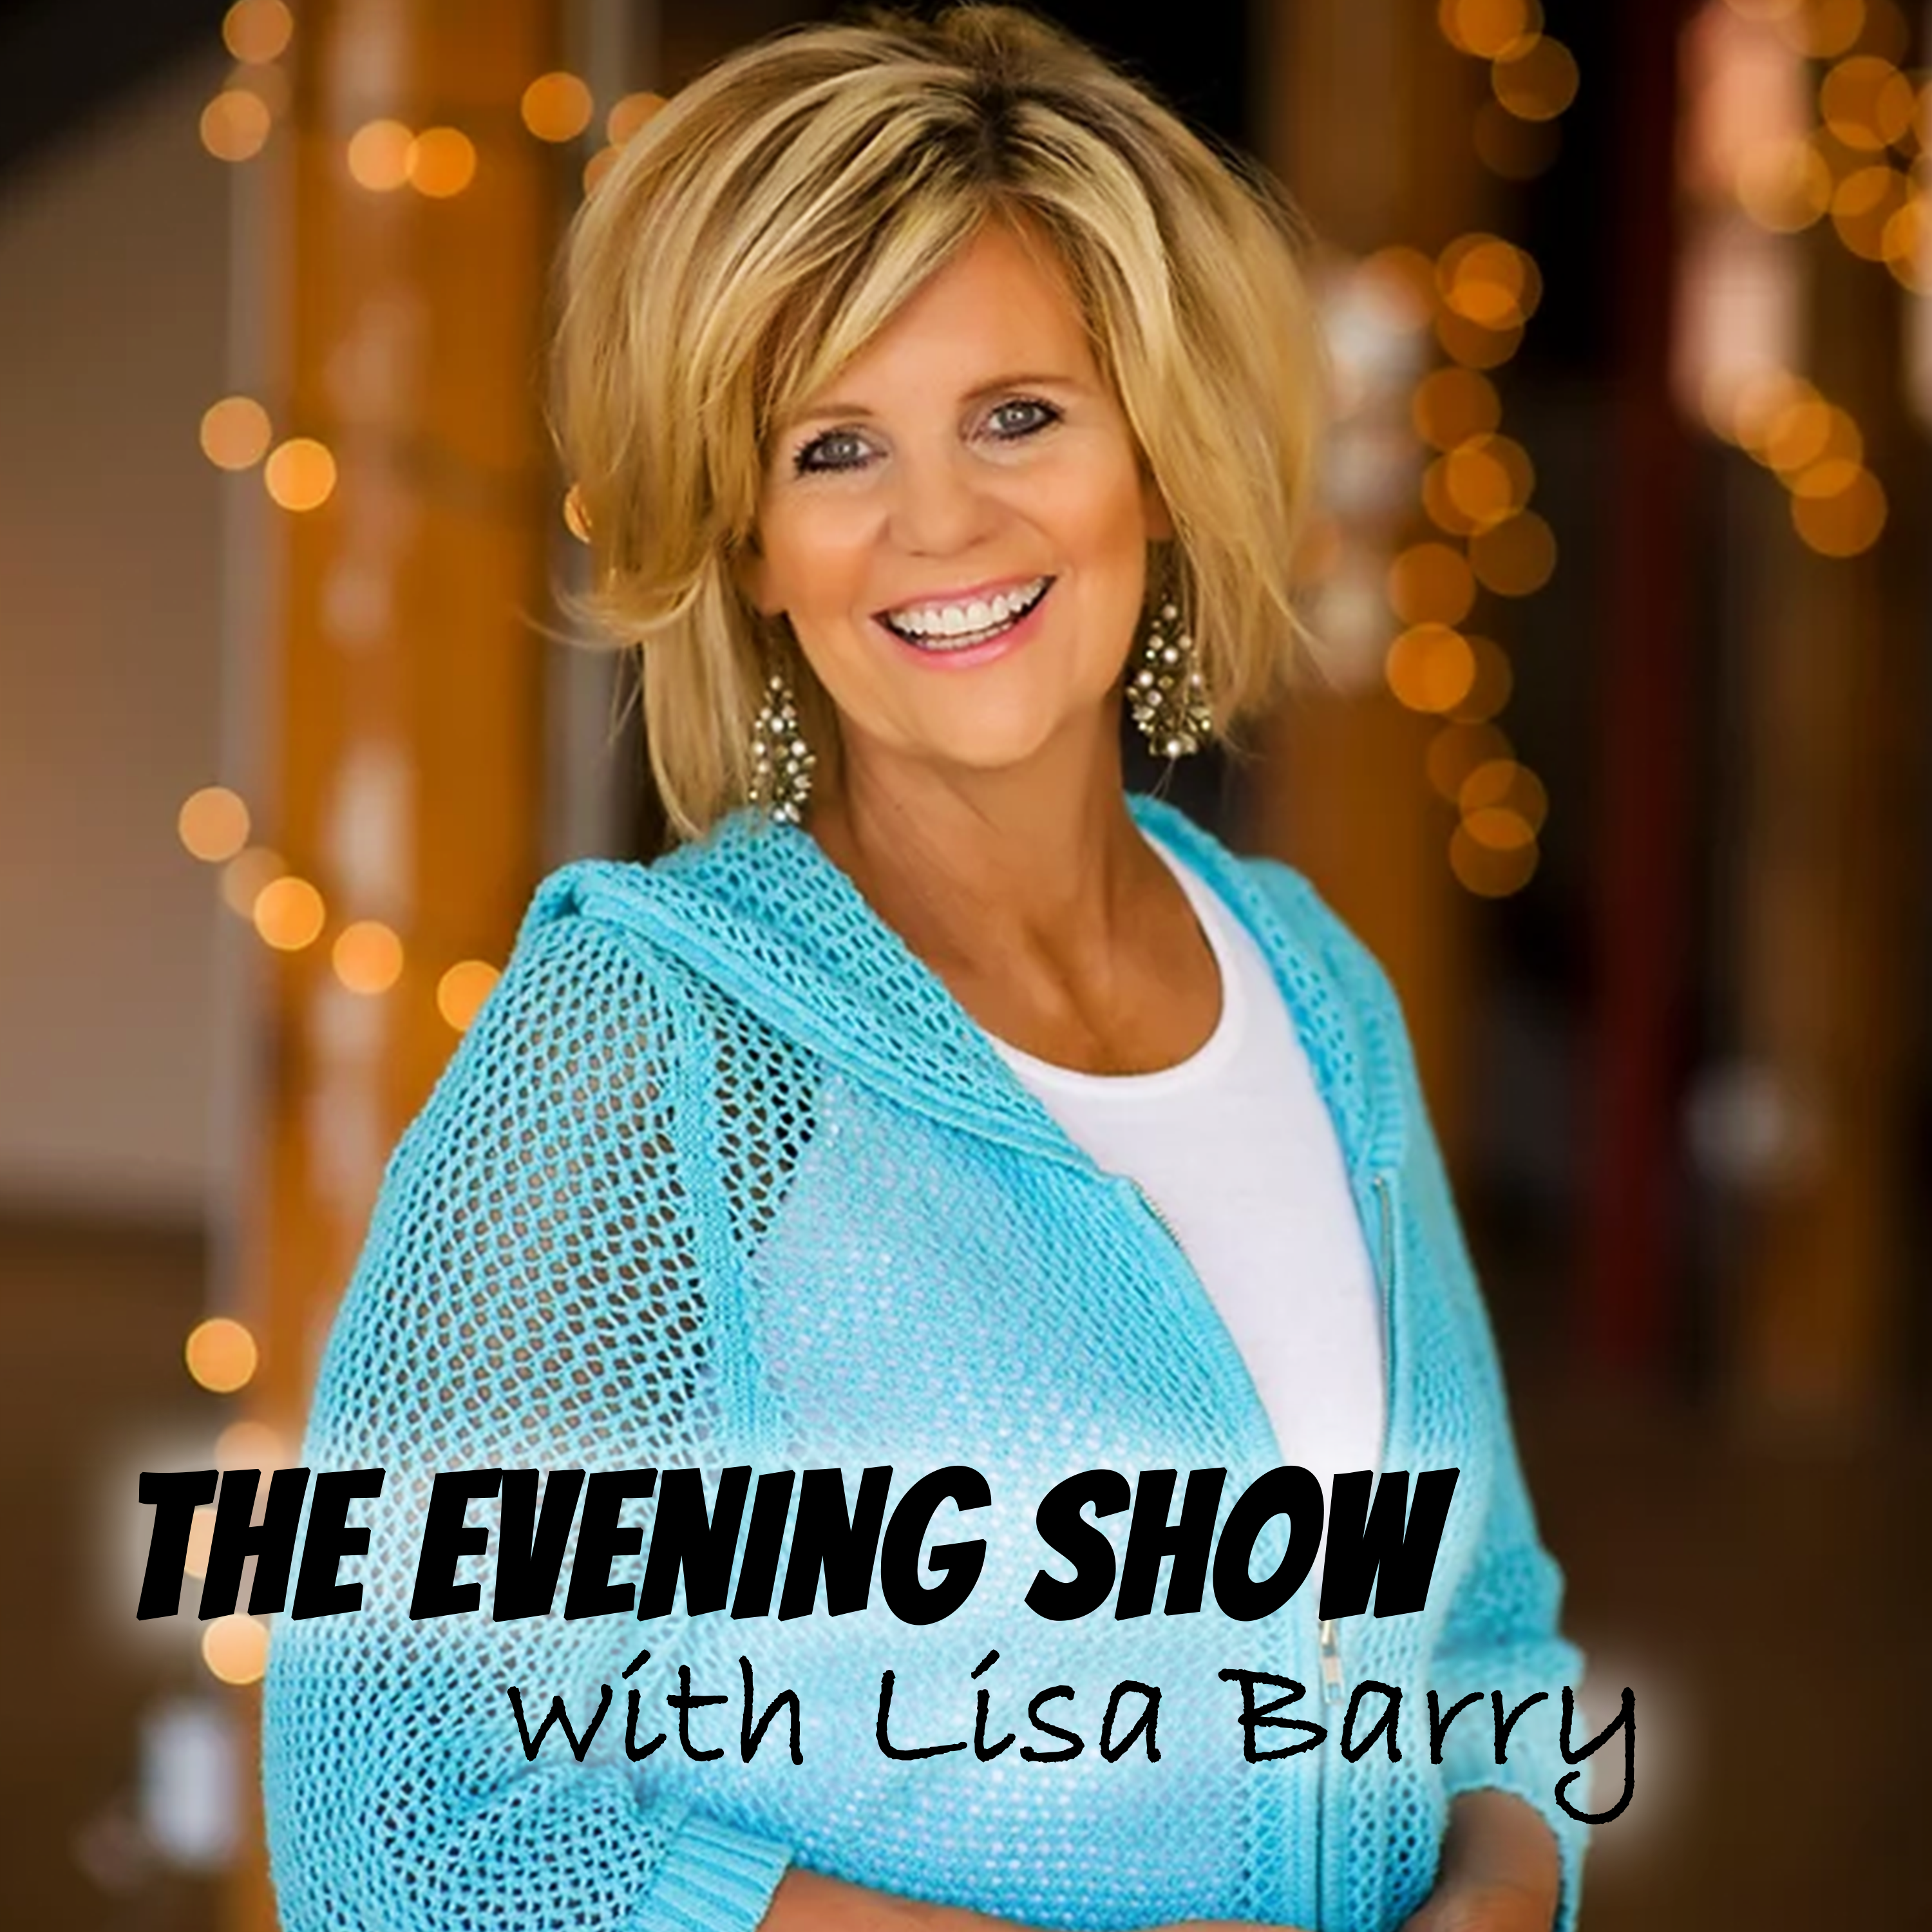 The Evening Show with Lisa Barry